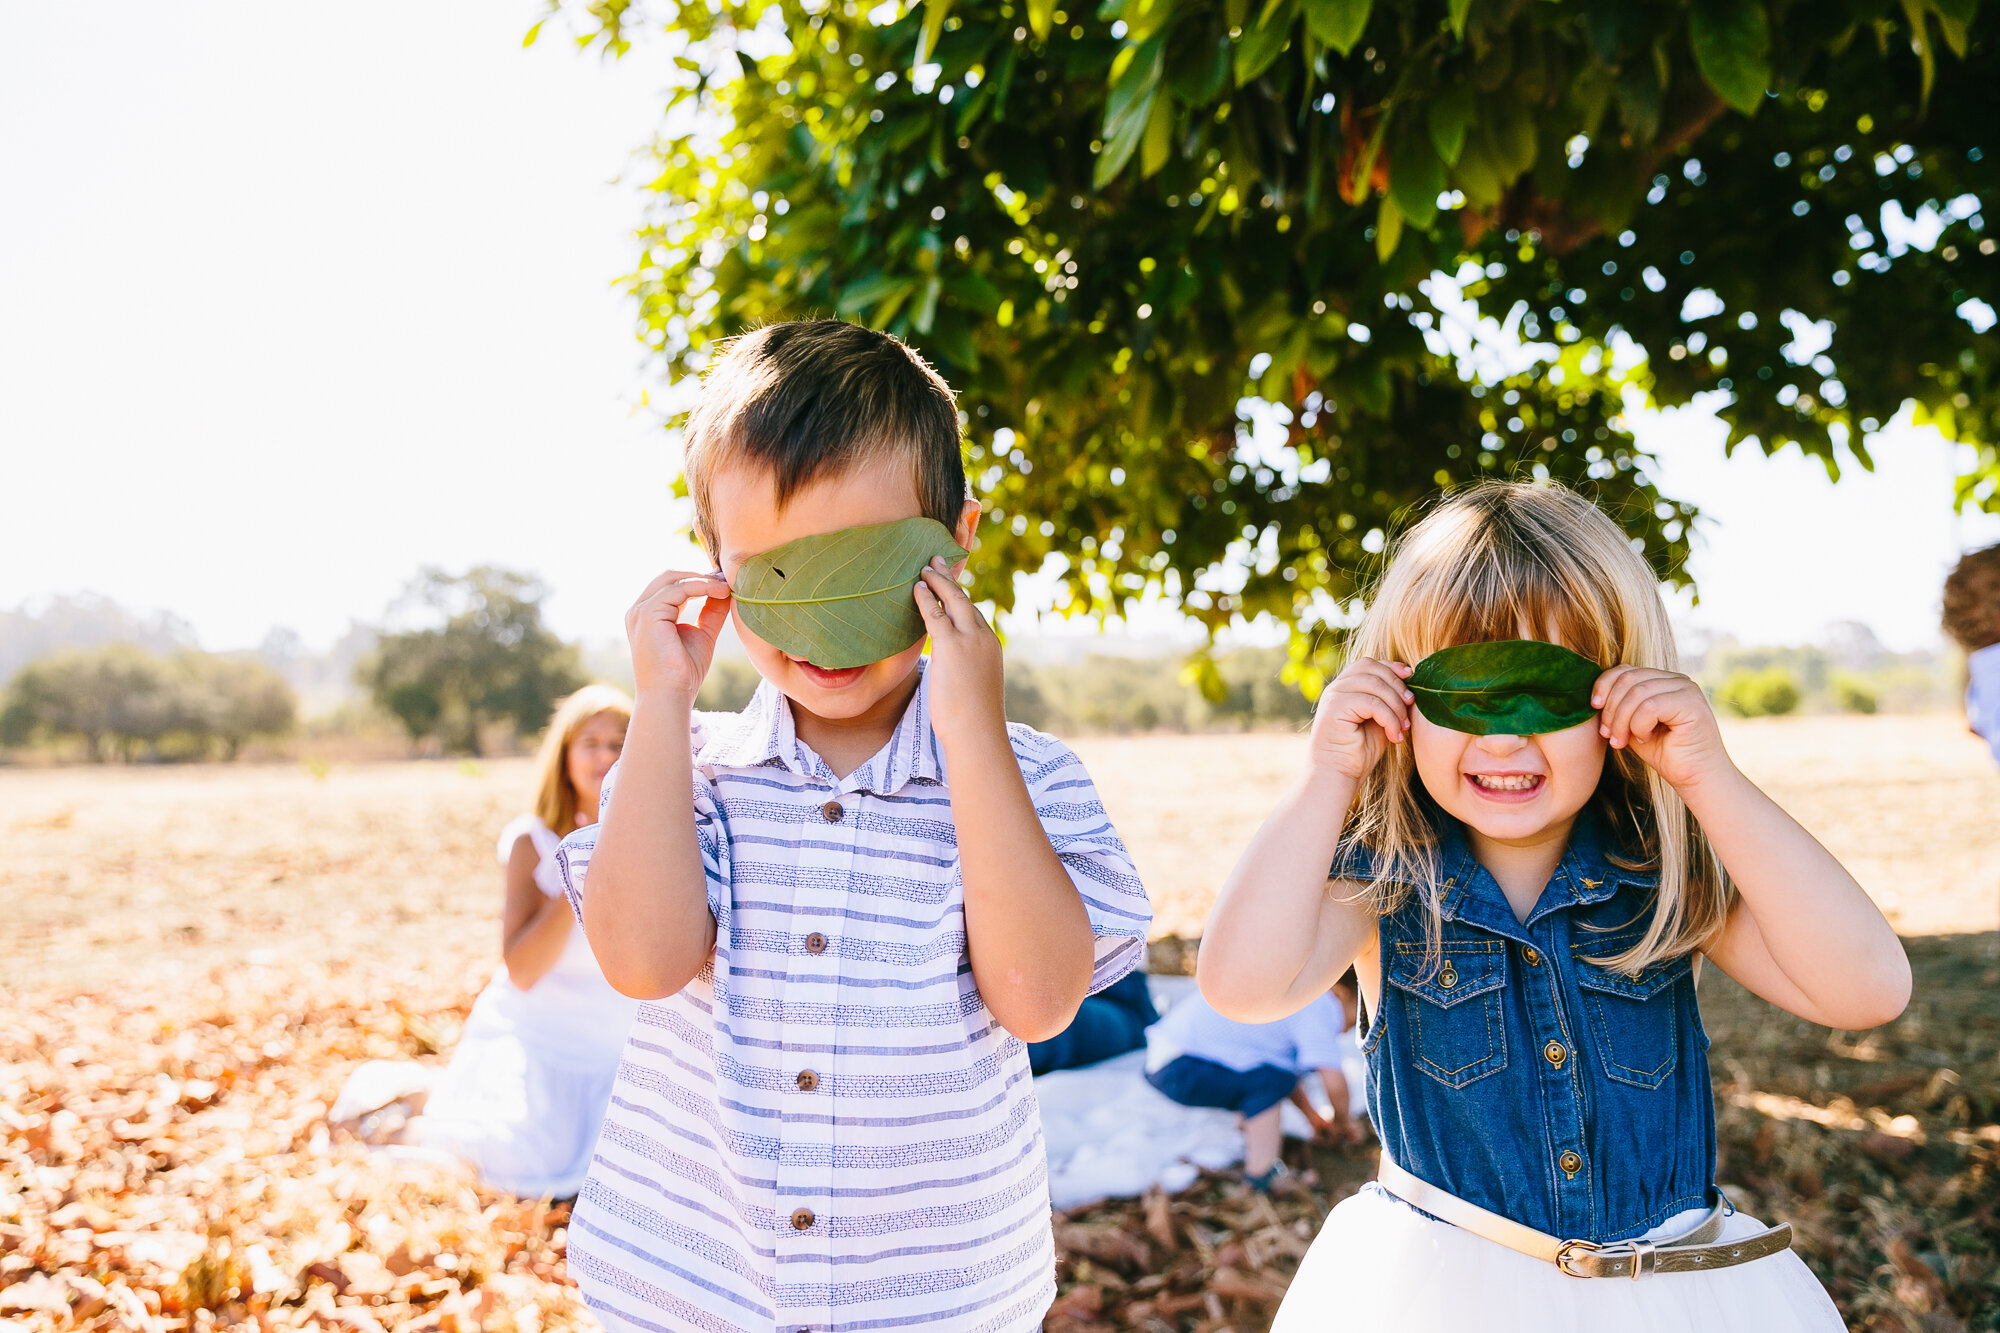 Los_Angeles_Family_Photography_Orange_County_Children_Babies_Field_Farm_Outdoors_Morning_Session_California_Girls_Boys_Kids_Photography-1267.jpg